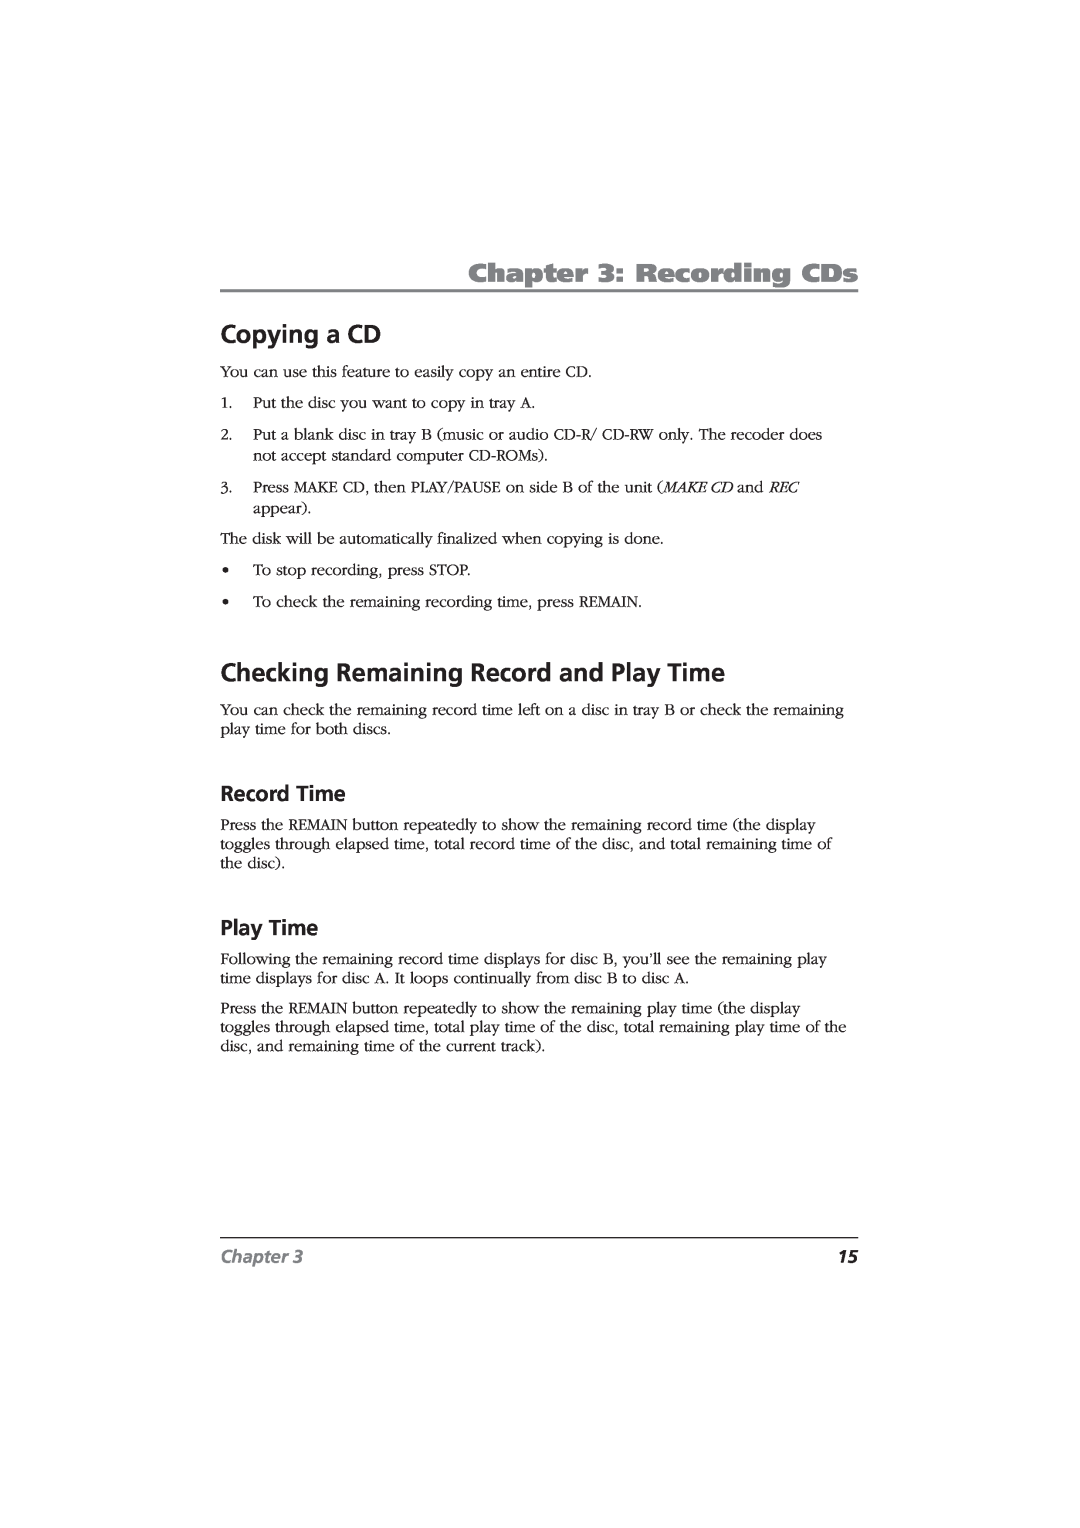 RCA CDRW120 manual Recording CDs, Copying a CD, Checking Remaining Record and Play Time, Chapter 